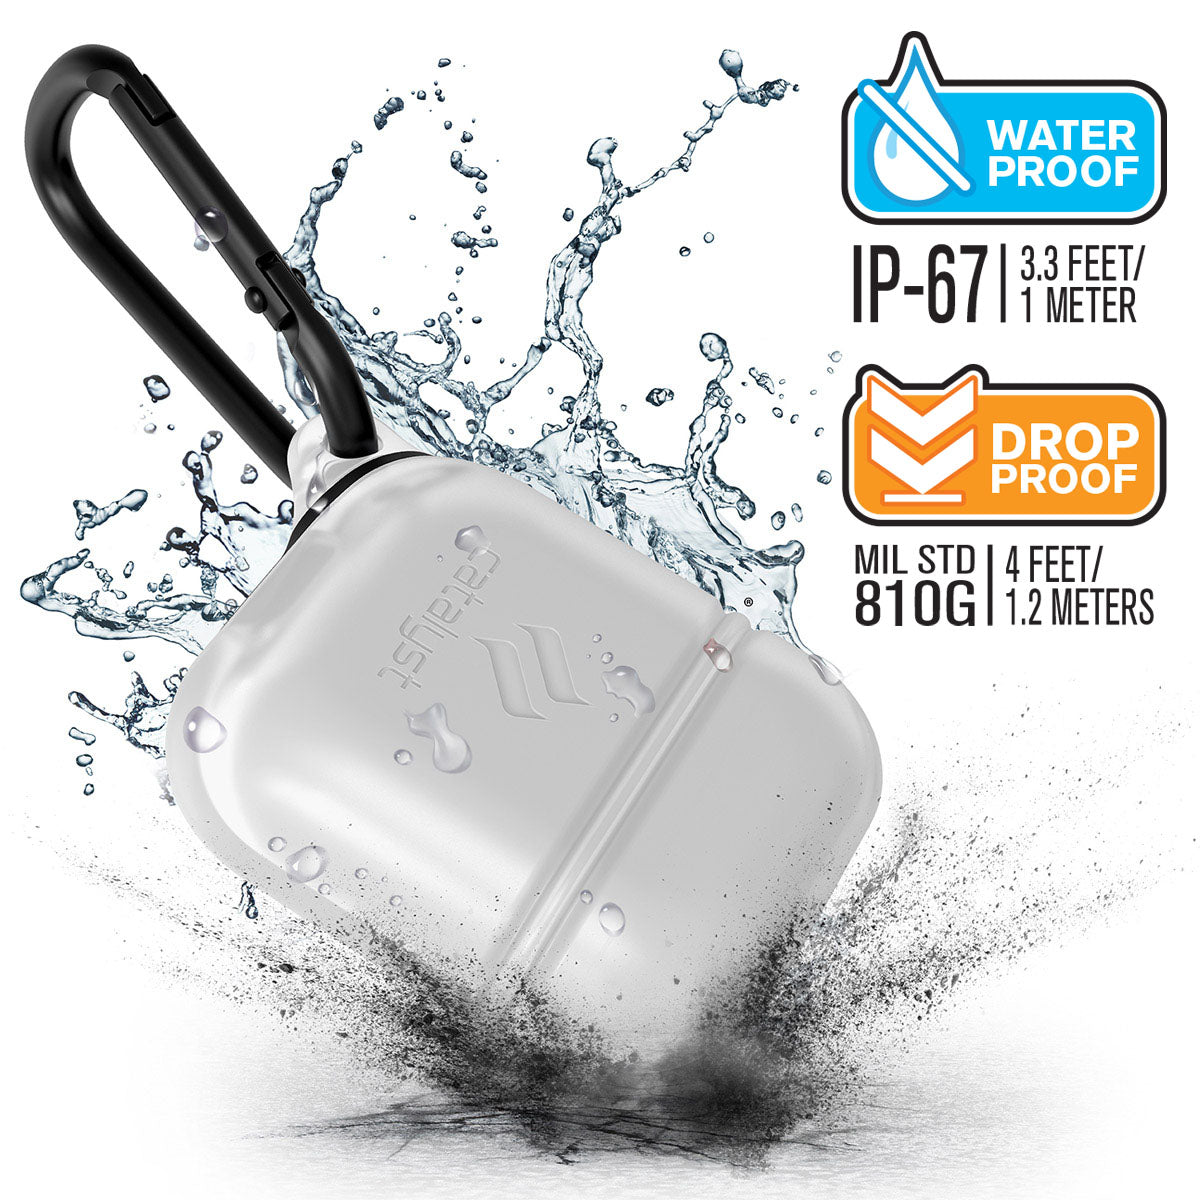 CATAPDWHT-FBA | Catalyst airpods gen2/1 waterproof case + carabiner showing the case drop proof and water proof features with attached carabiner in frost white text reads water proof IP-67 3.3 FEET/1 METER DROP PROOF MIL STD 810G 1.2 METERS